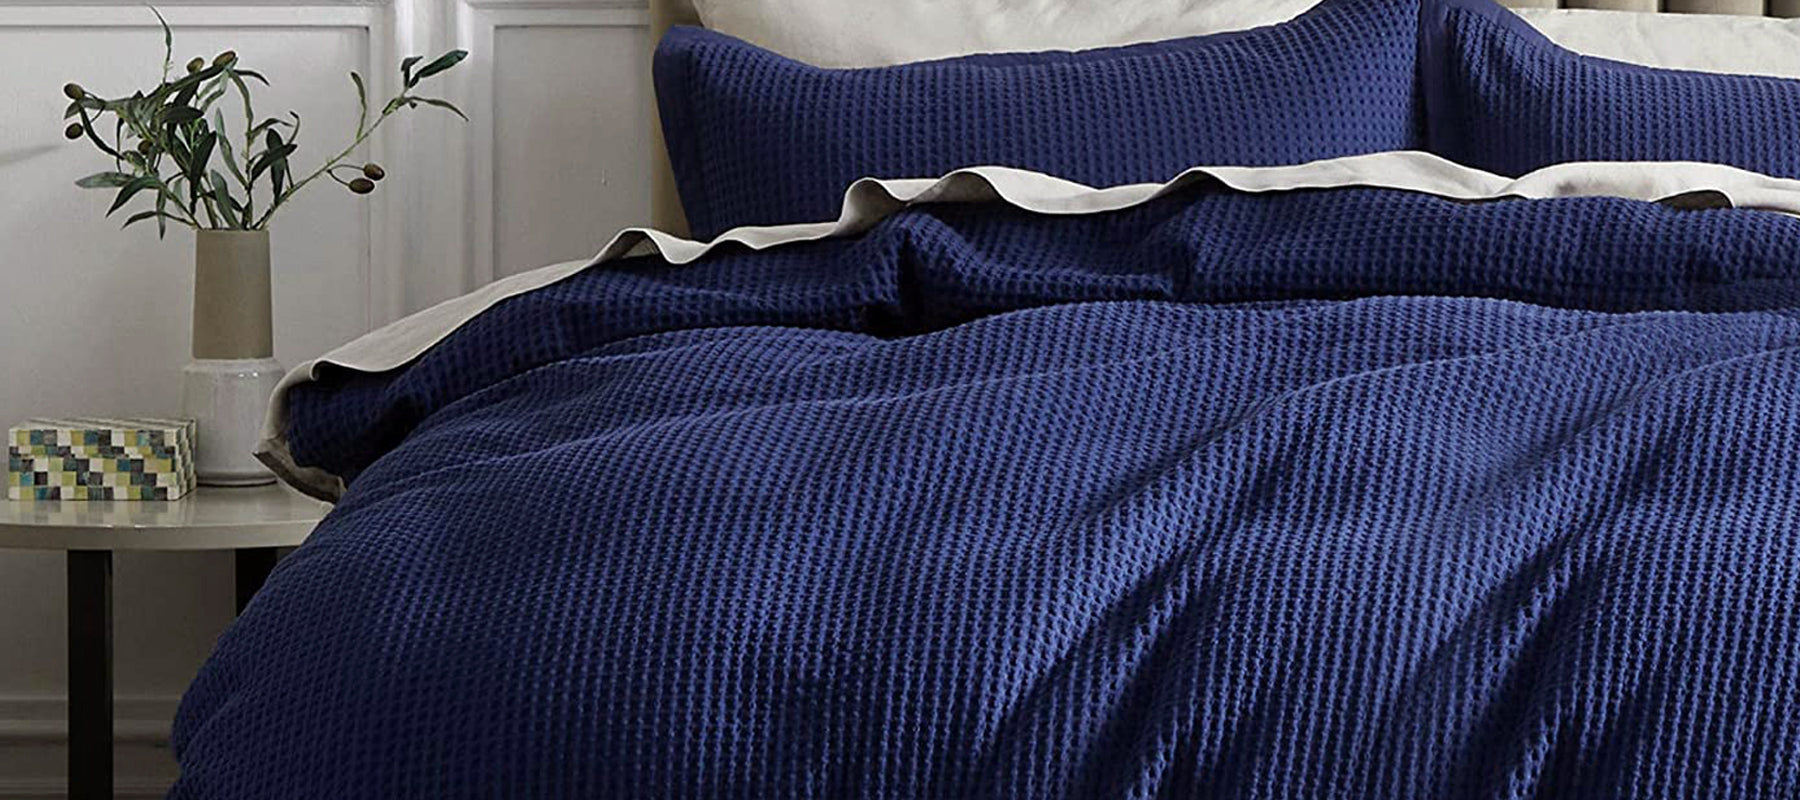 Textured Waffle Duvet Cover Sets